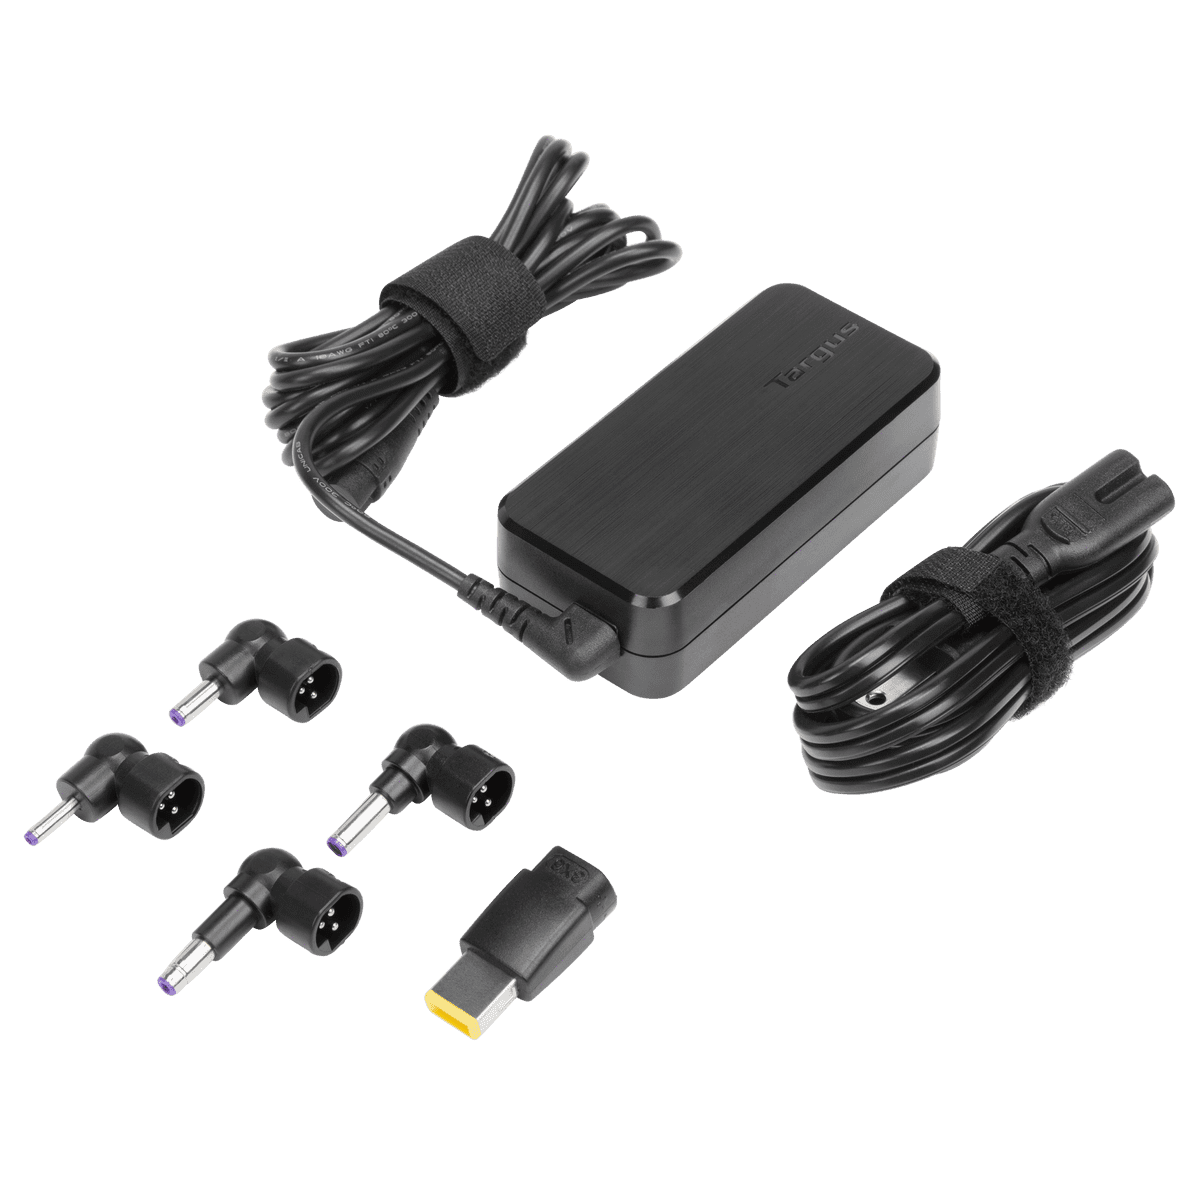 ASUS Gateway HP Lenovo IBM Includes 5 Power Tips Compatible with Major Brands: Acer Toshiba APD33US Fujitsu Targus 90W DC Universal Laptop Car Charger Compaq Dell 